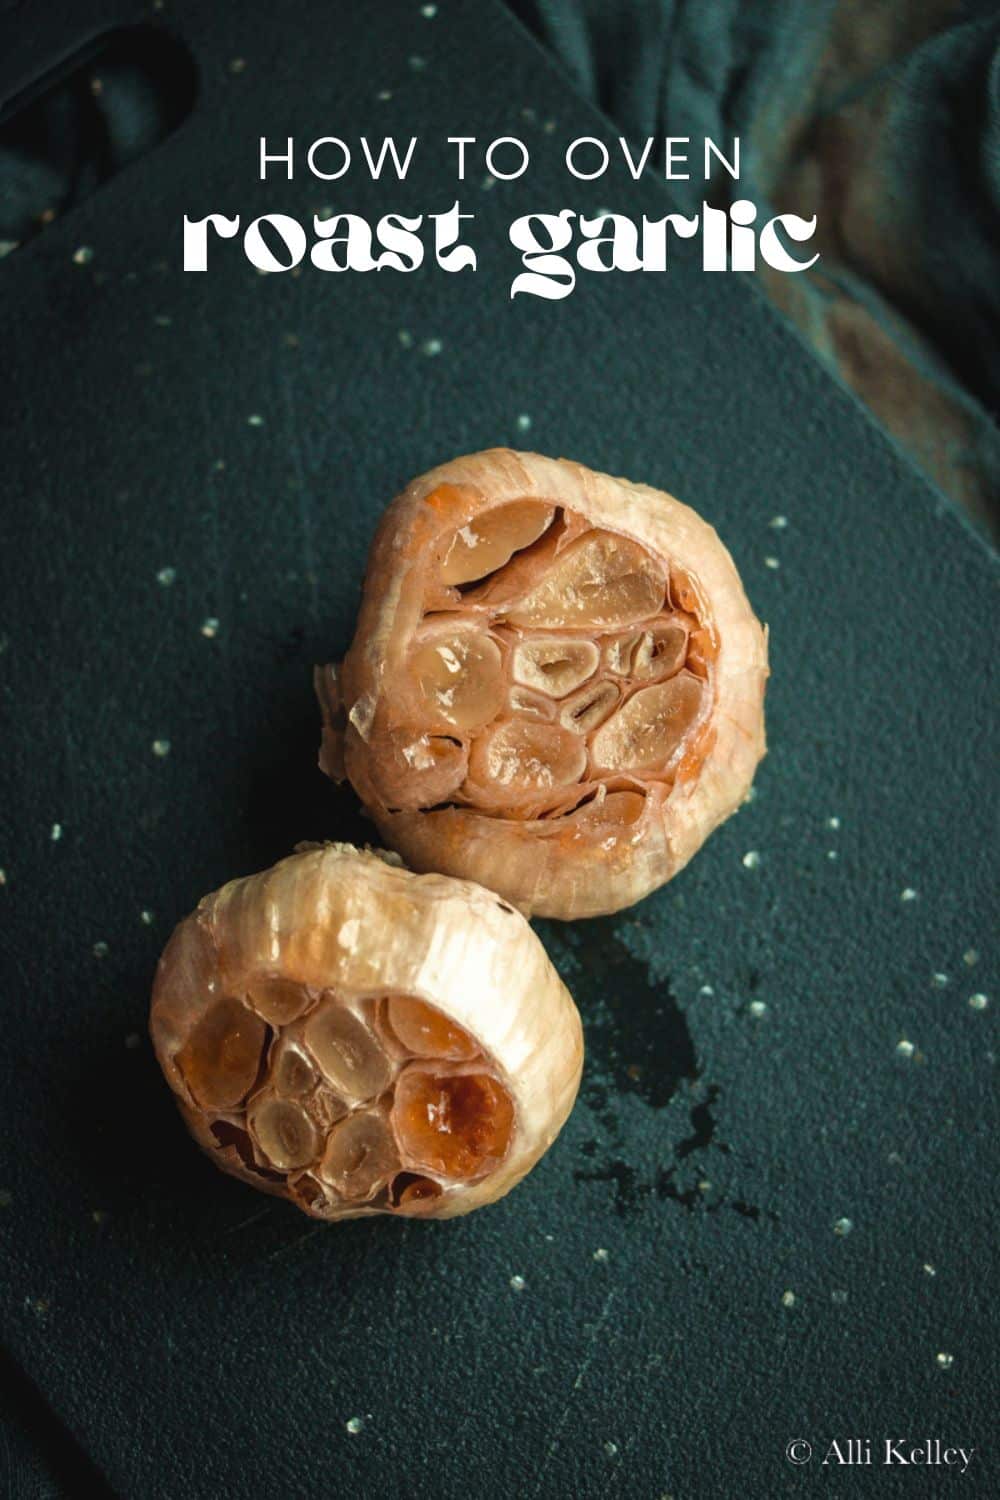 Garlic is just one of those irresistible flavors - it's intense yet sweet and earthy all at the same time. And when roasted, it takes on a fantastic flavor that is simply irresistible. Plus, when you know how to roast garlic at home, you can add this delicious ingredient to all sorts of recipes.